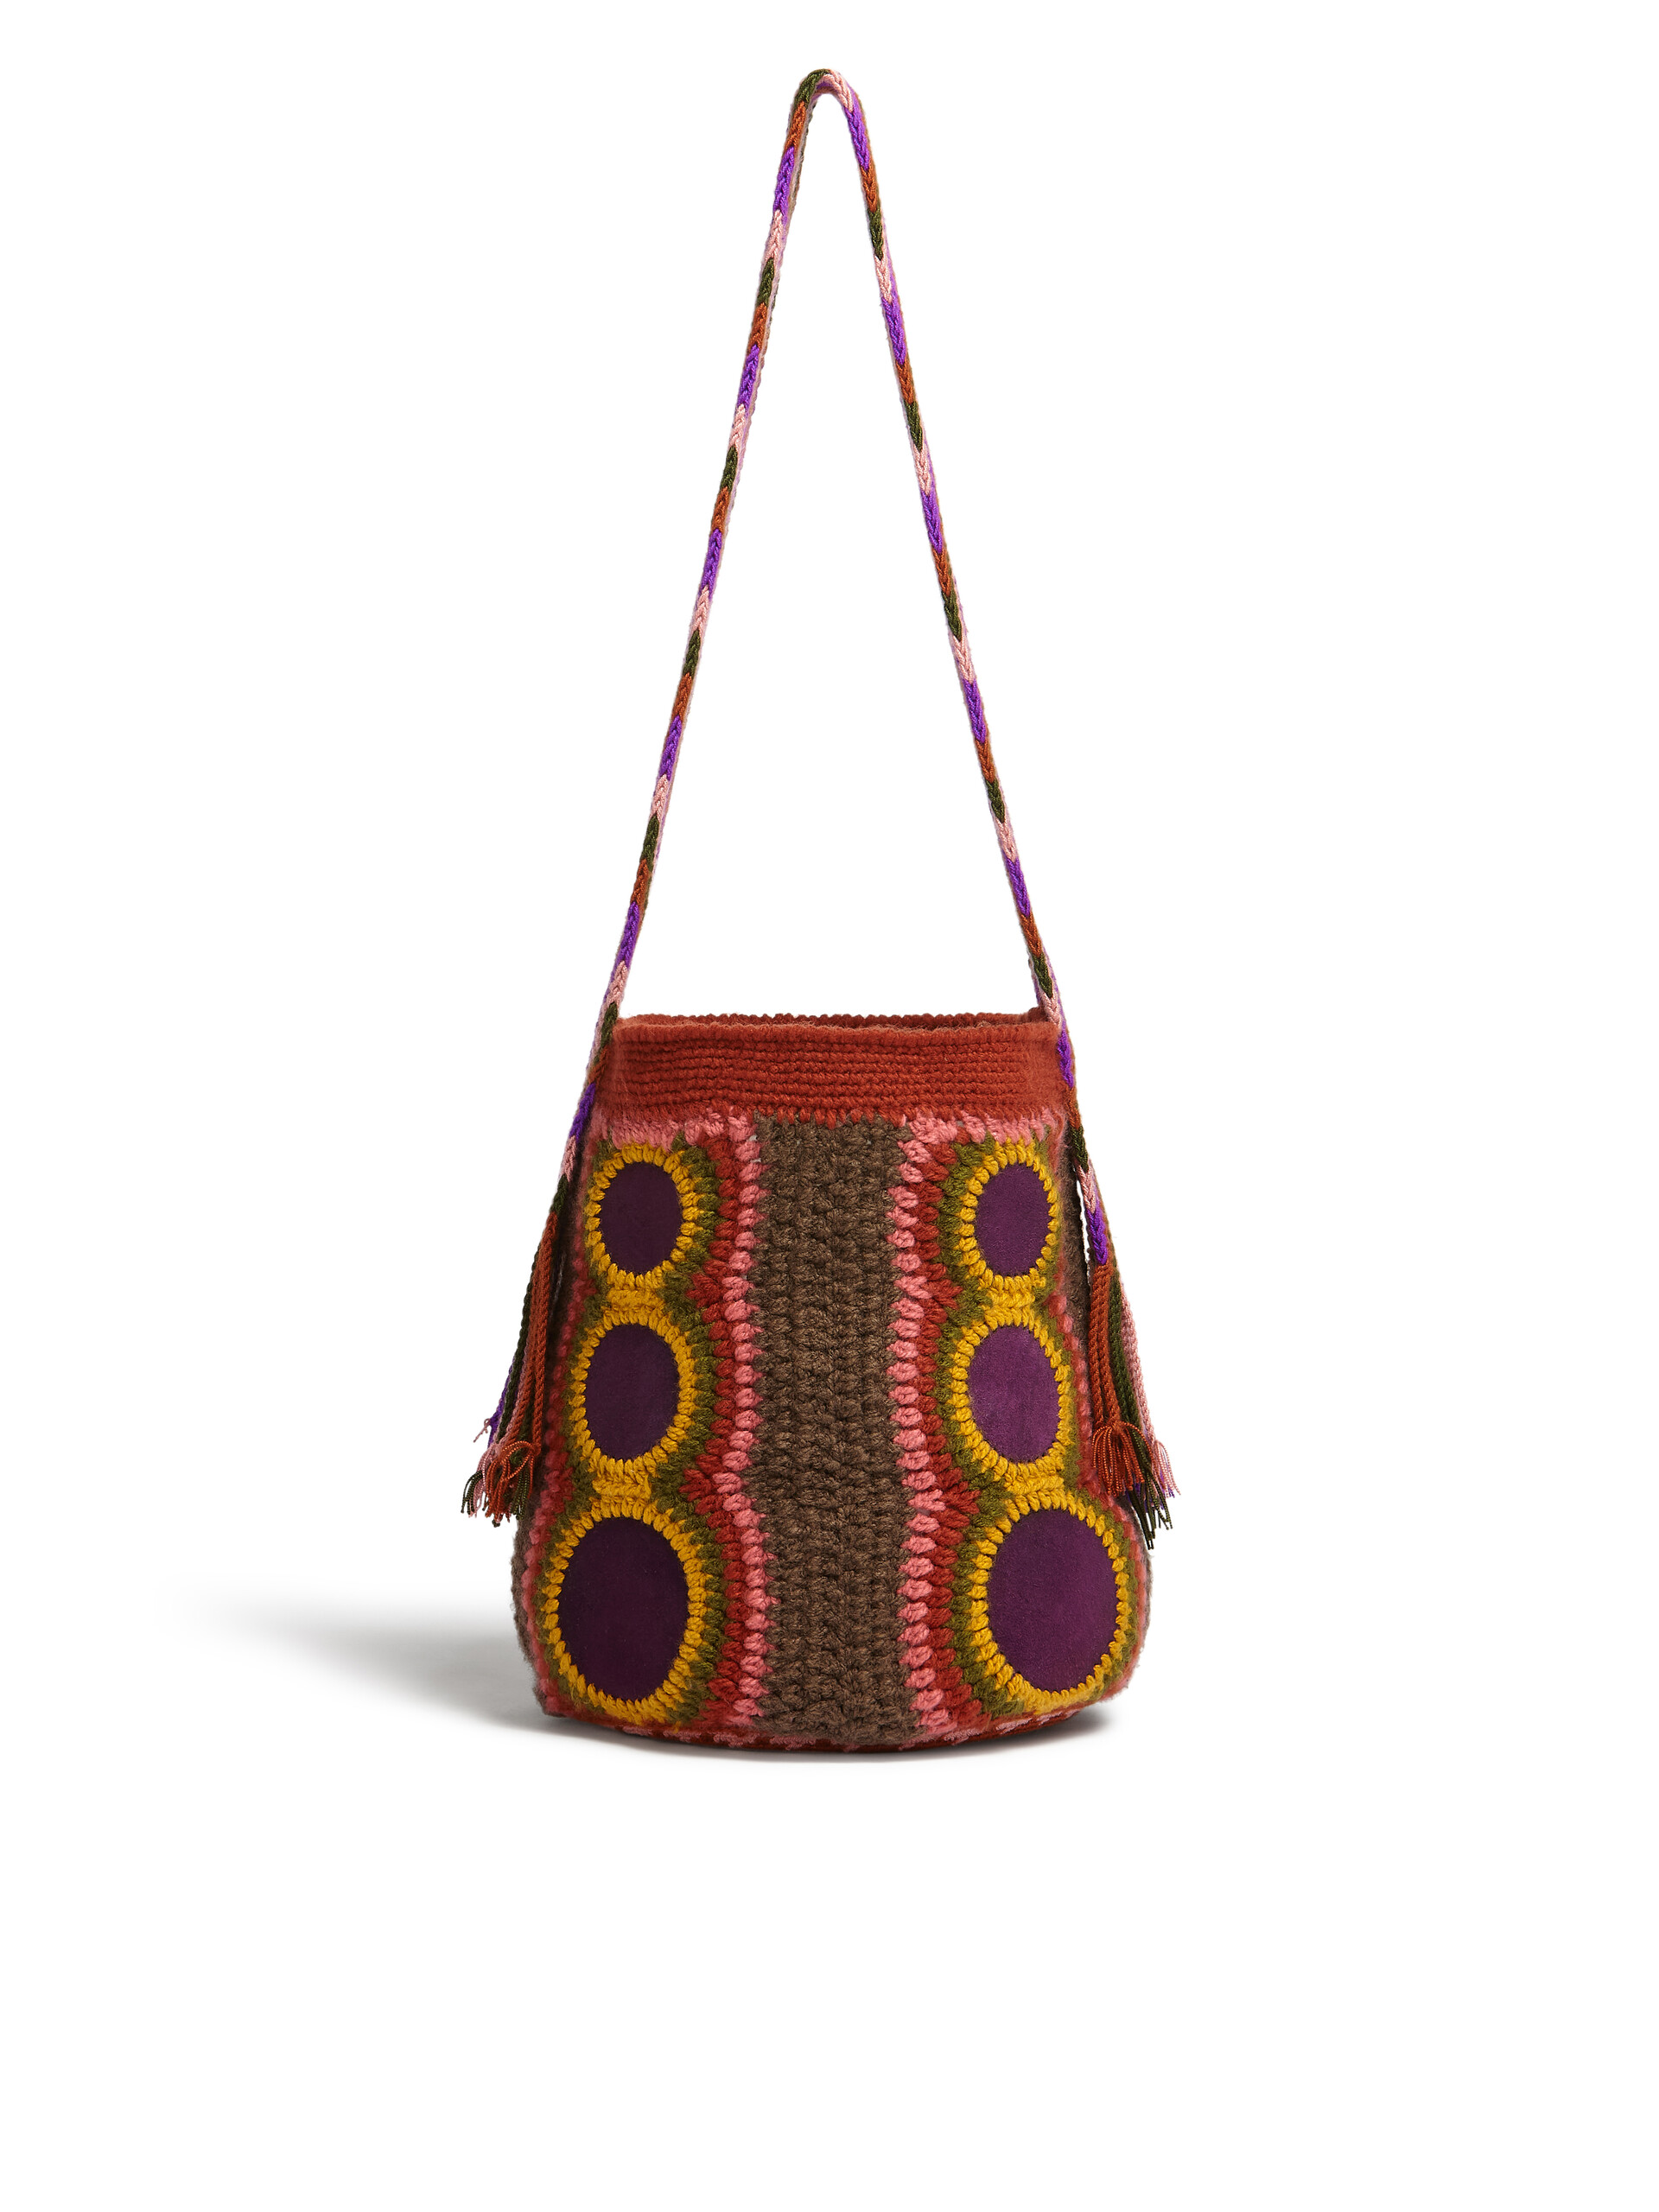 MARNI MARKET bag in brown and purple technical wool - Bolsos shopper - Image 3